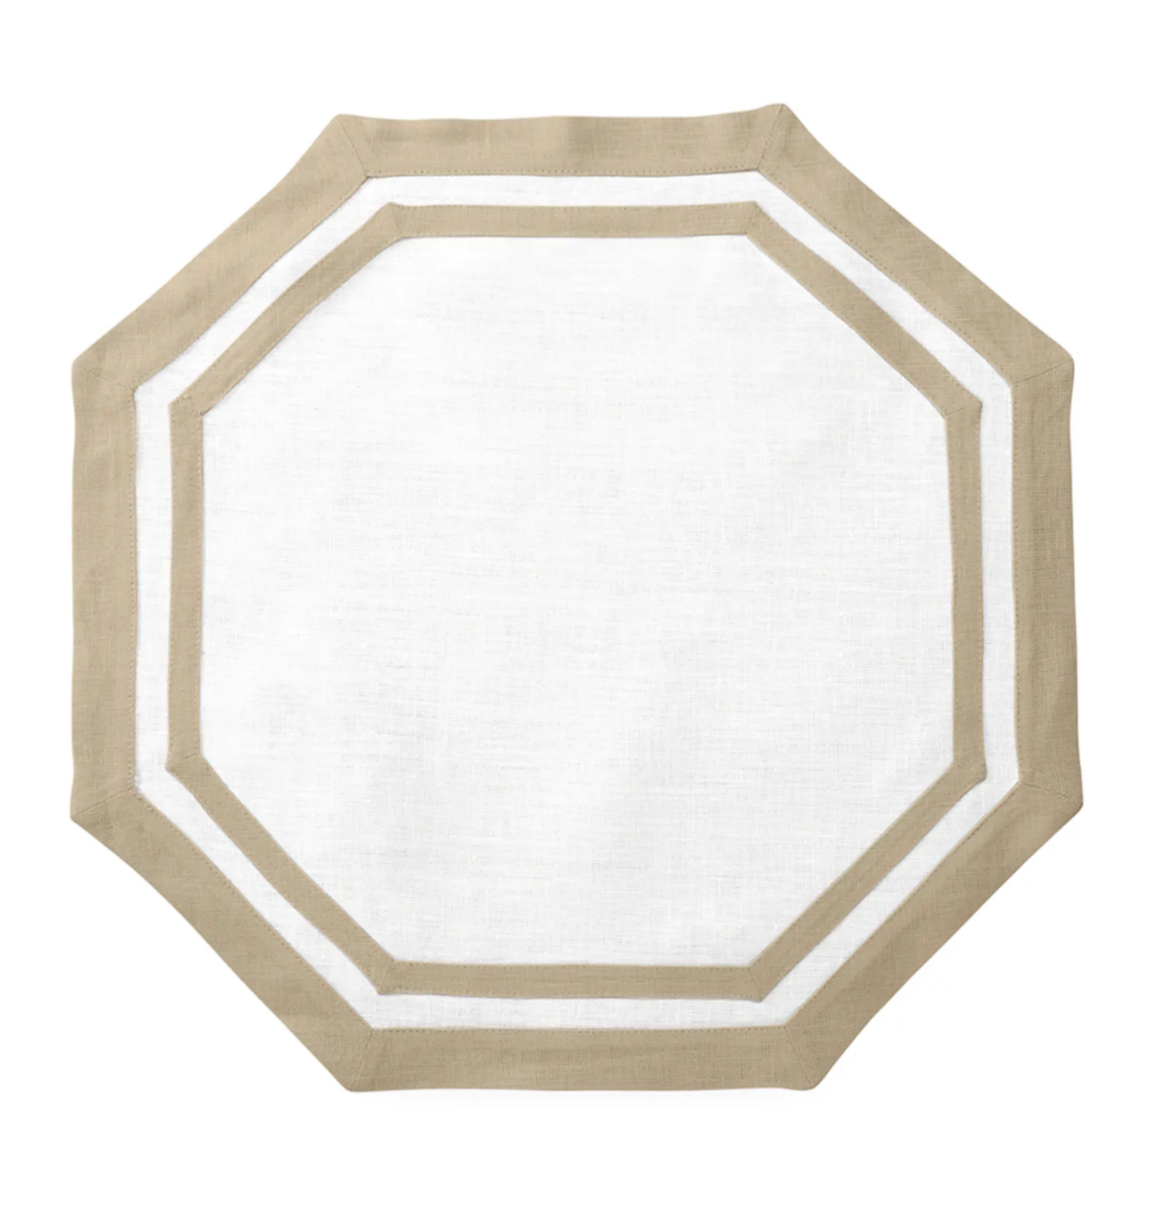 Casual Couture Octagon Placemats, Set of 4